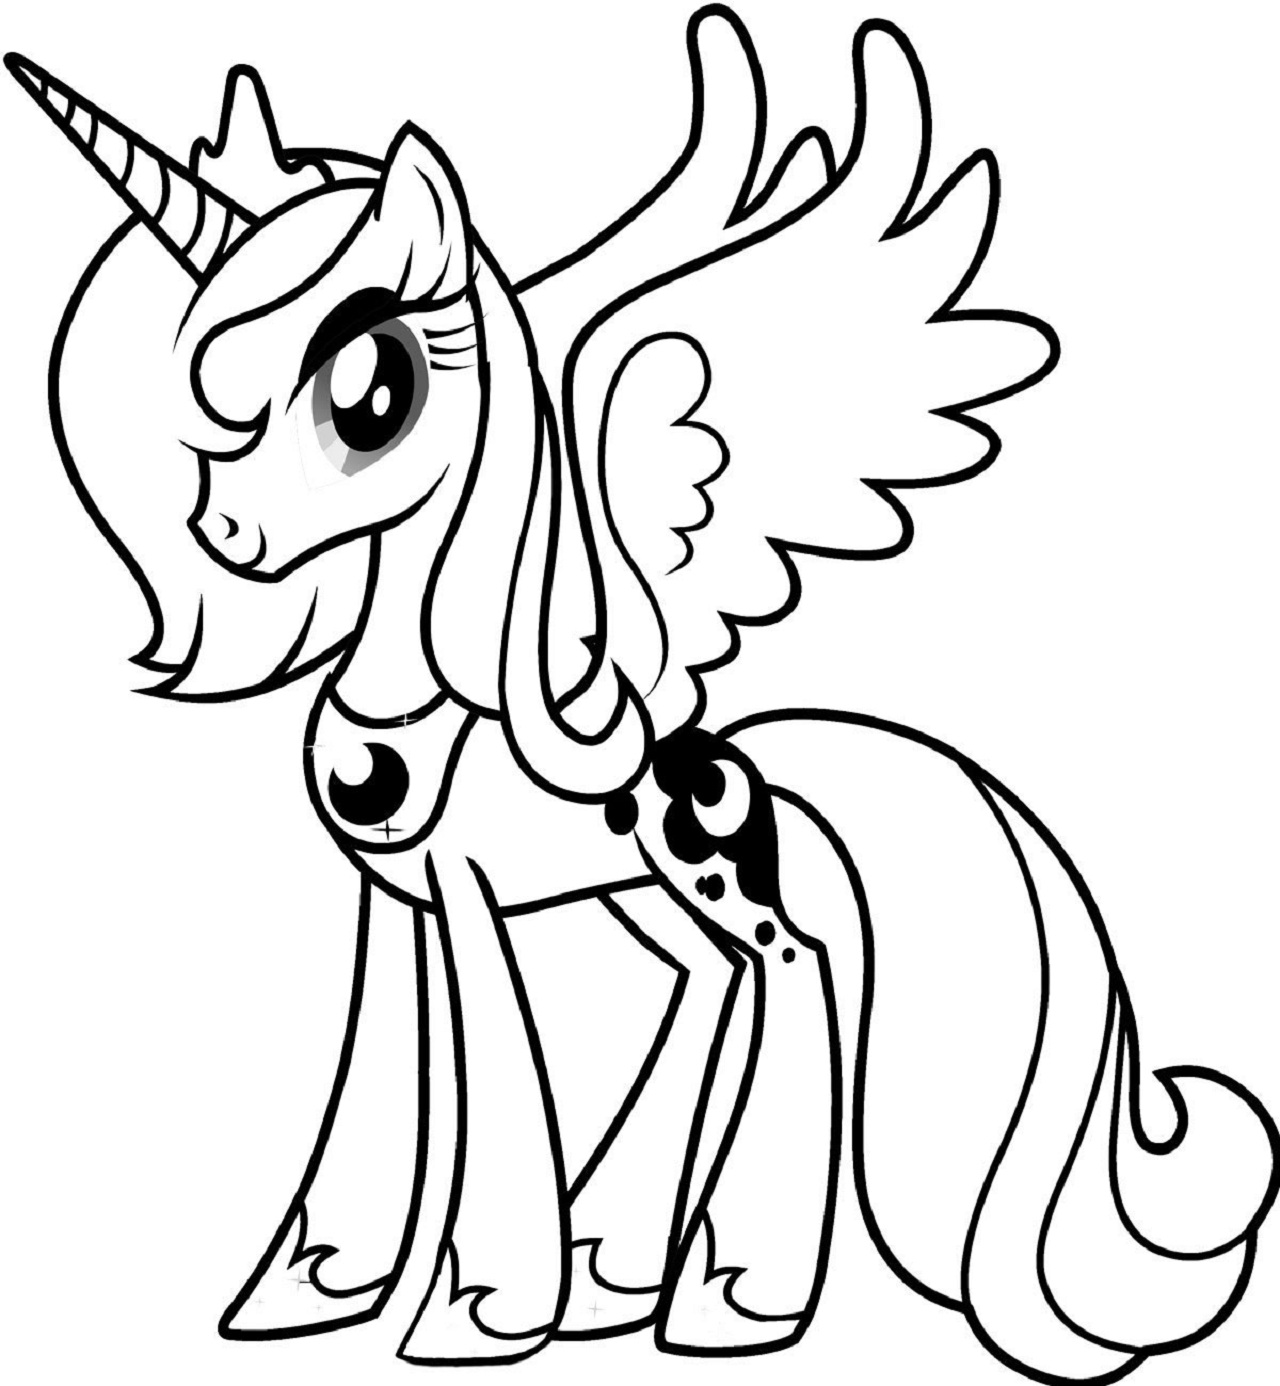 my-little-pony-coloring-pages-pdf-at-getdrawings-free-download